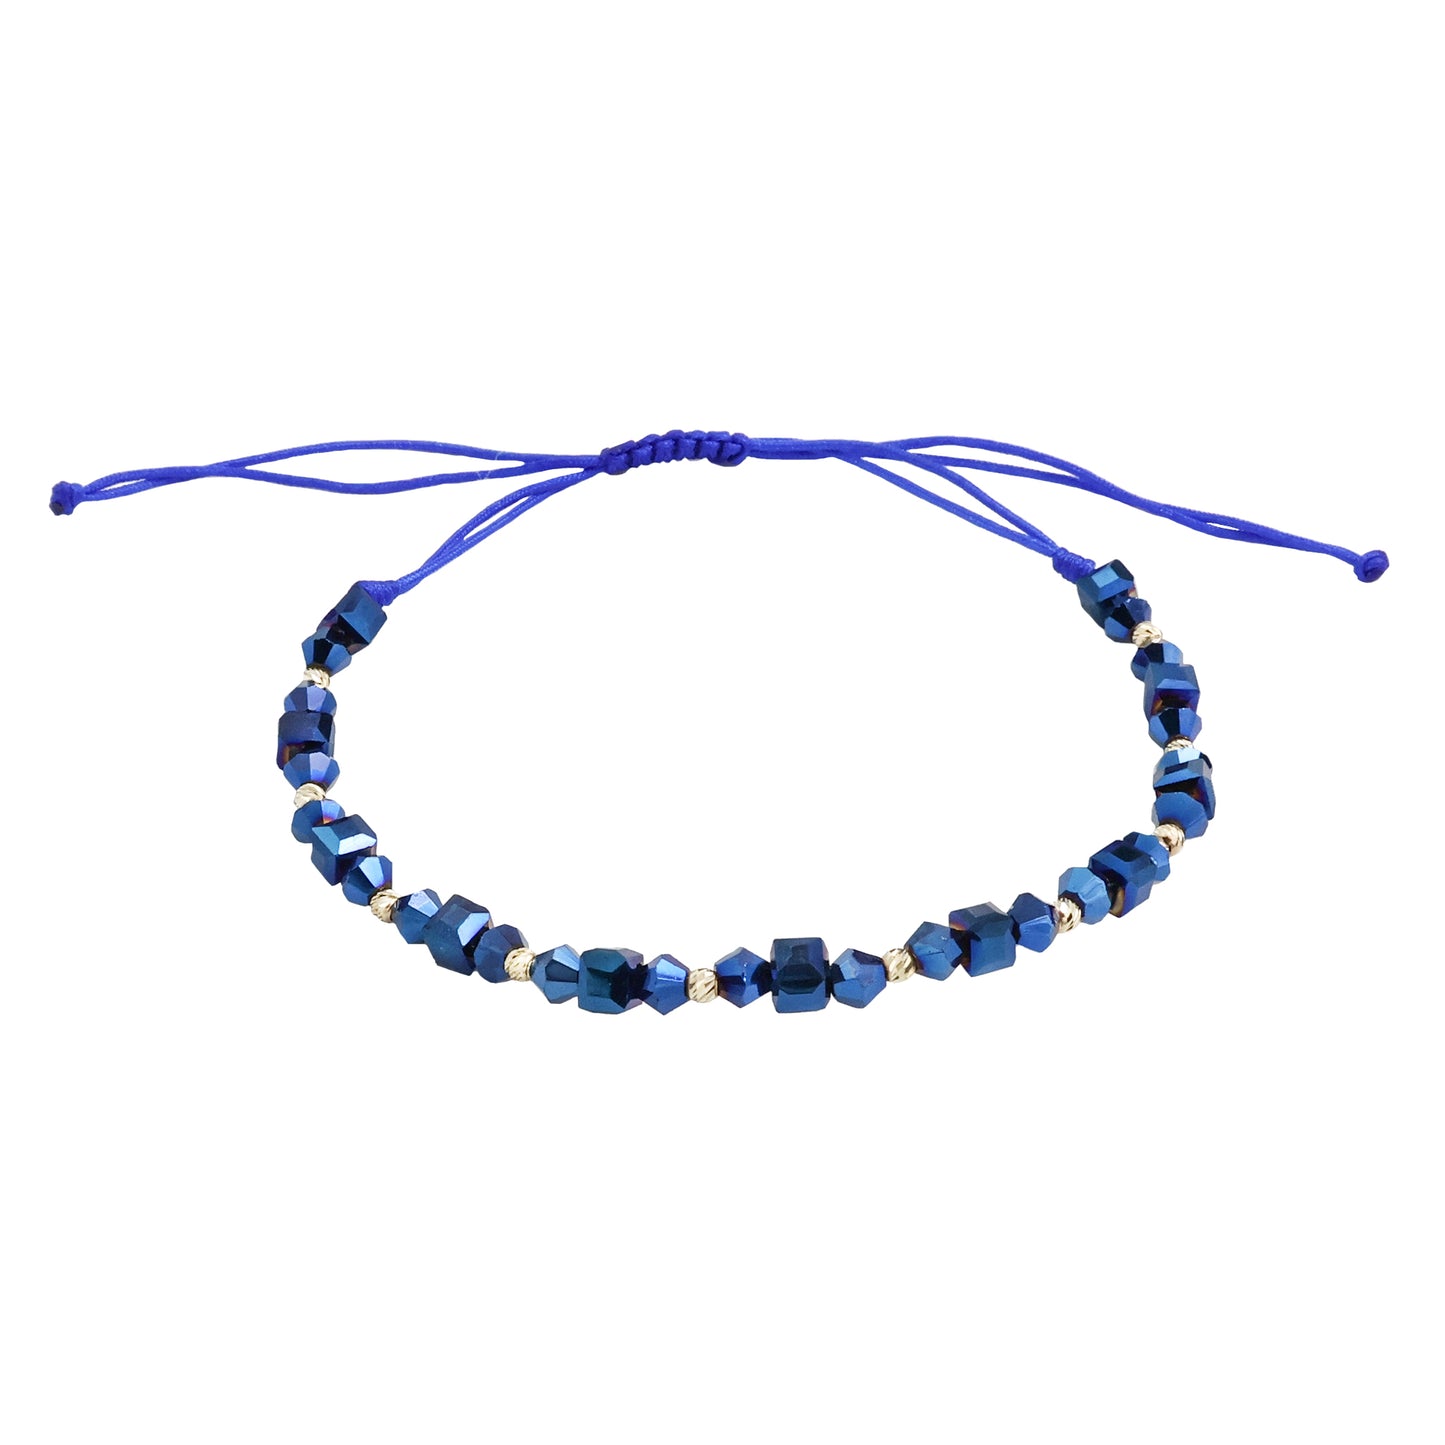 Bracelet with 10 beads of solid 14k gold and blue bicone and cubic crystals